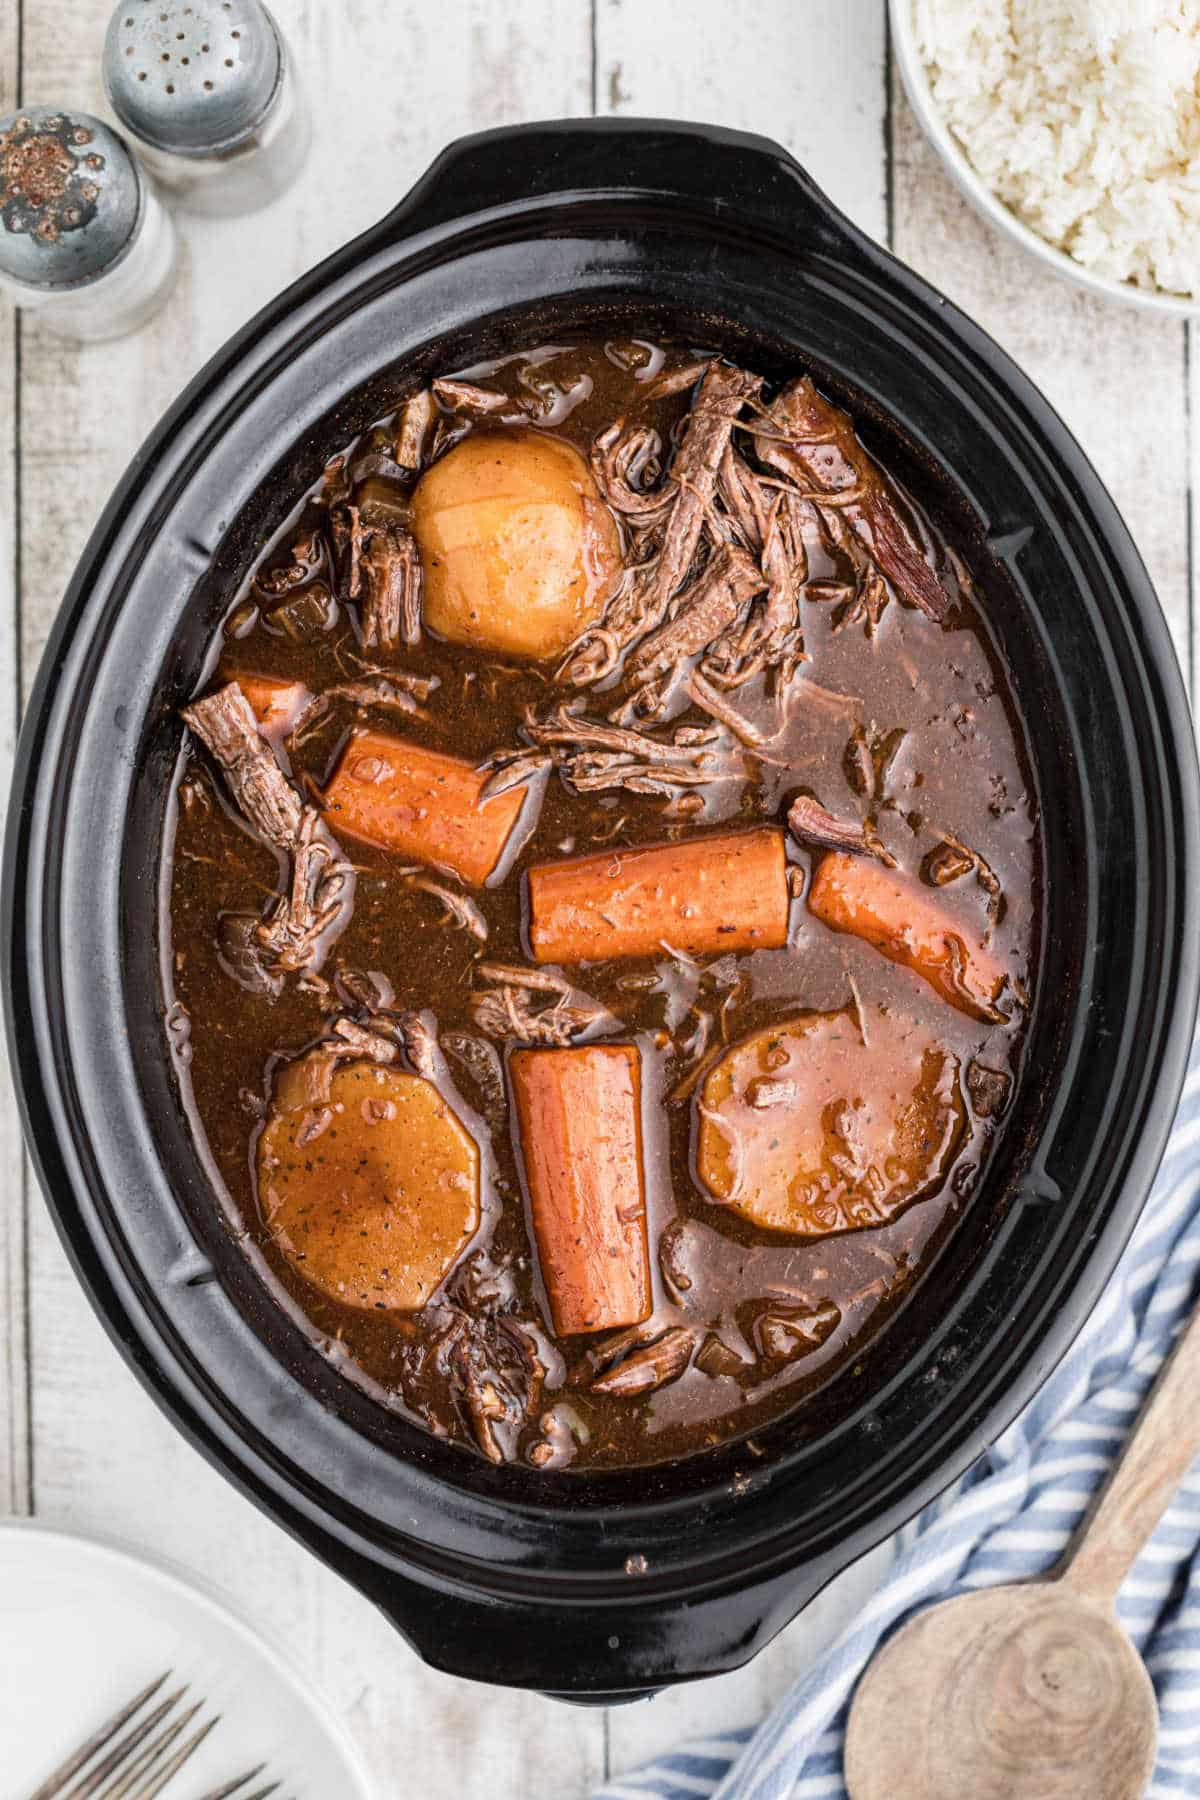 Overhead shot of a slow cooker full of venison roast with red wine and carrots and potatoes.